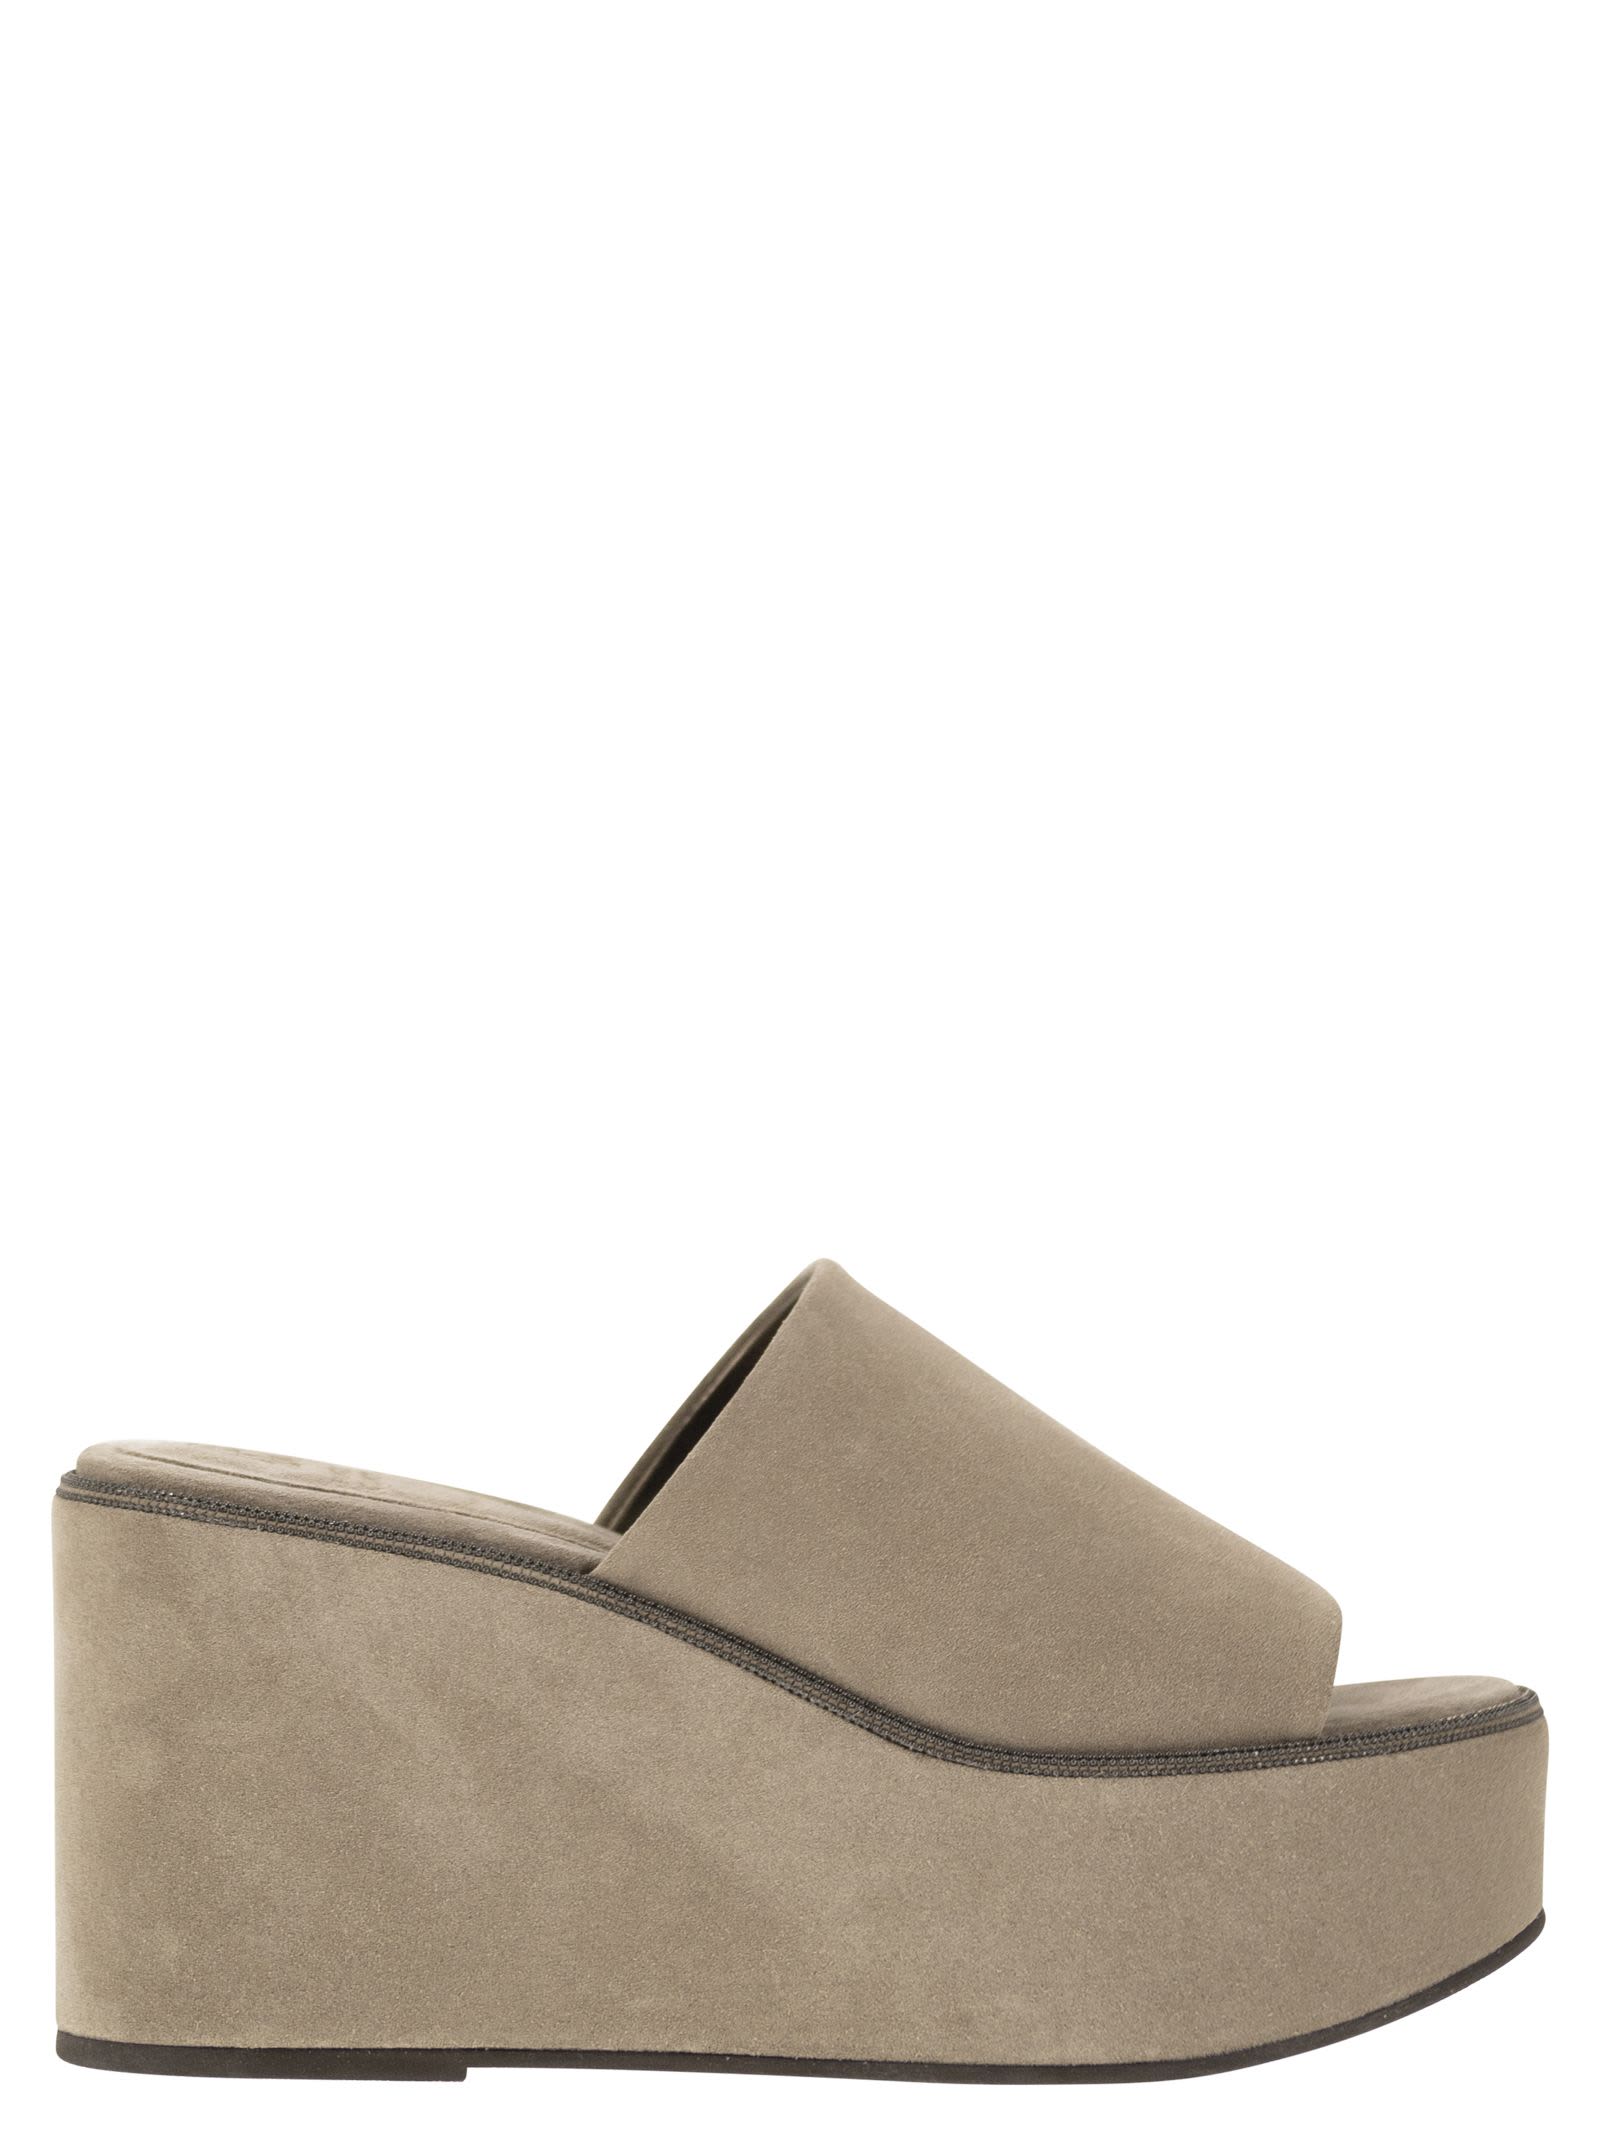 Suede Wedges With Precious Welt